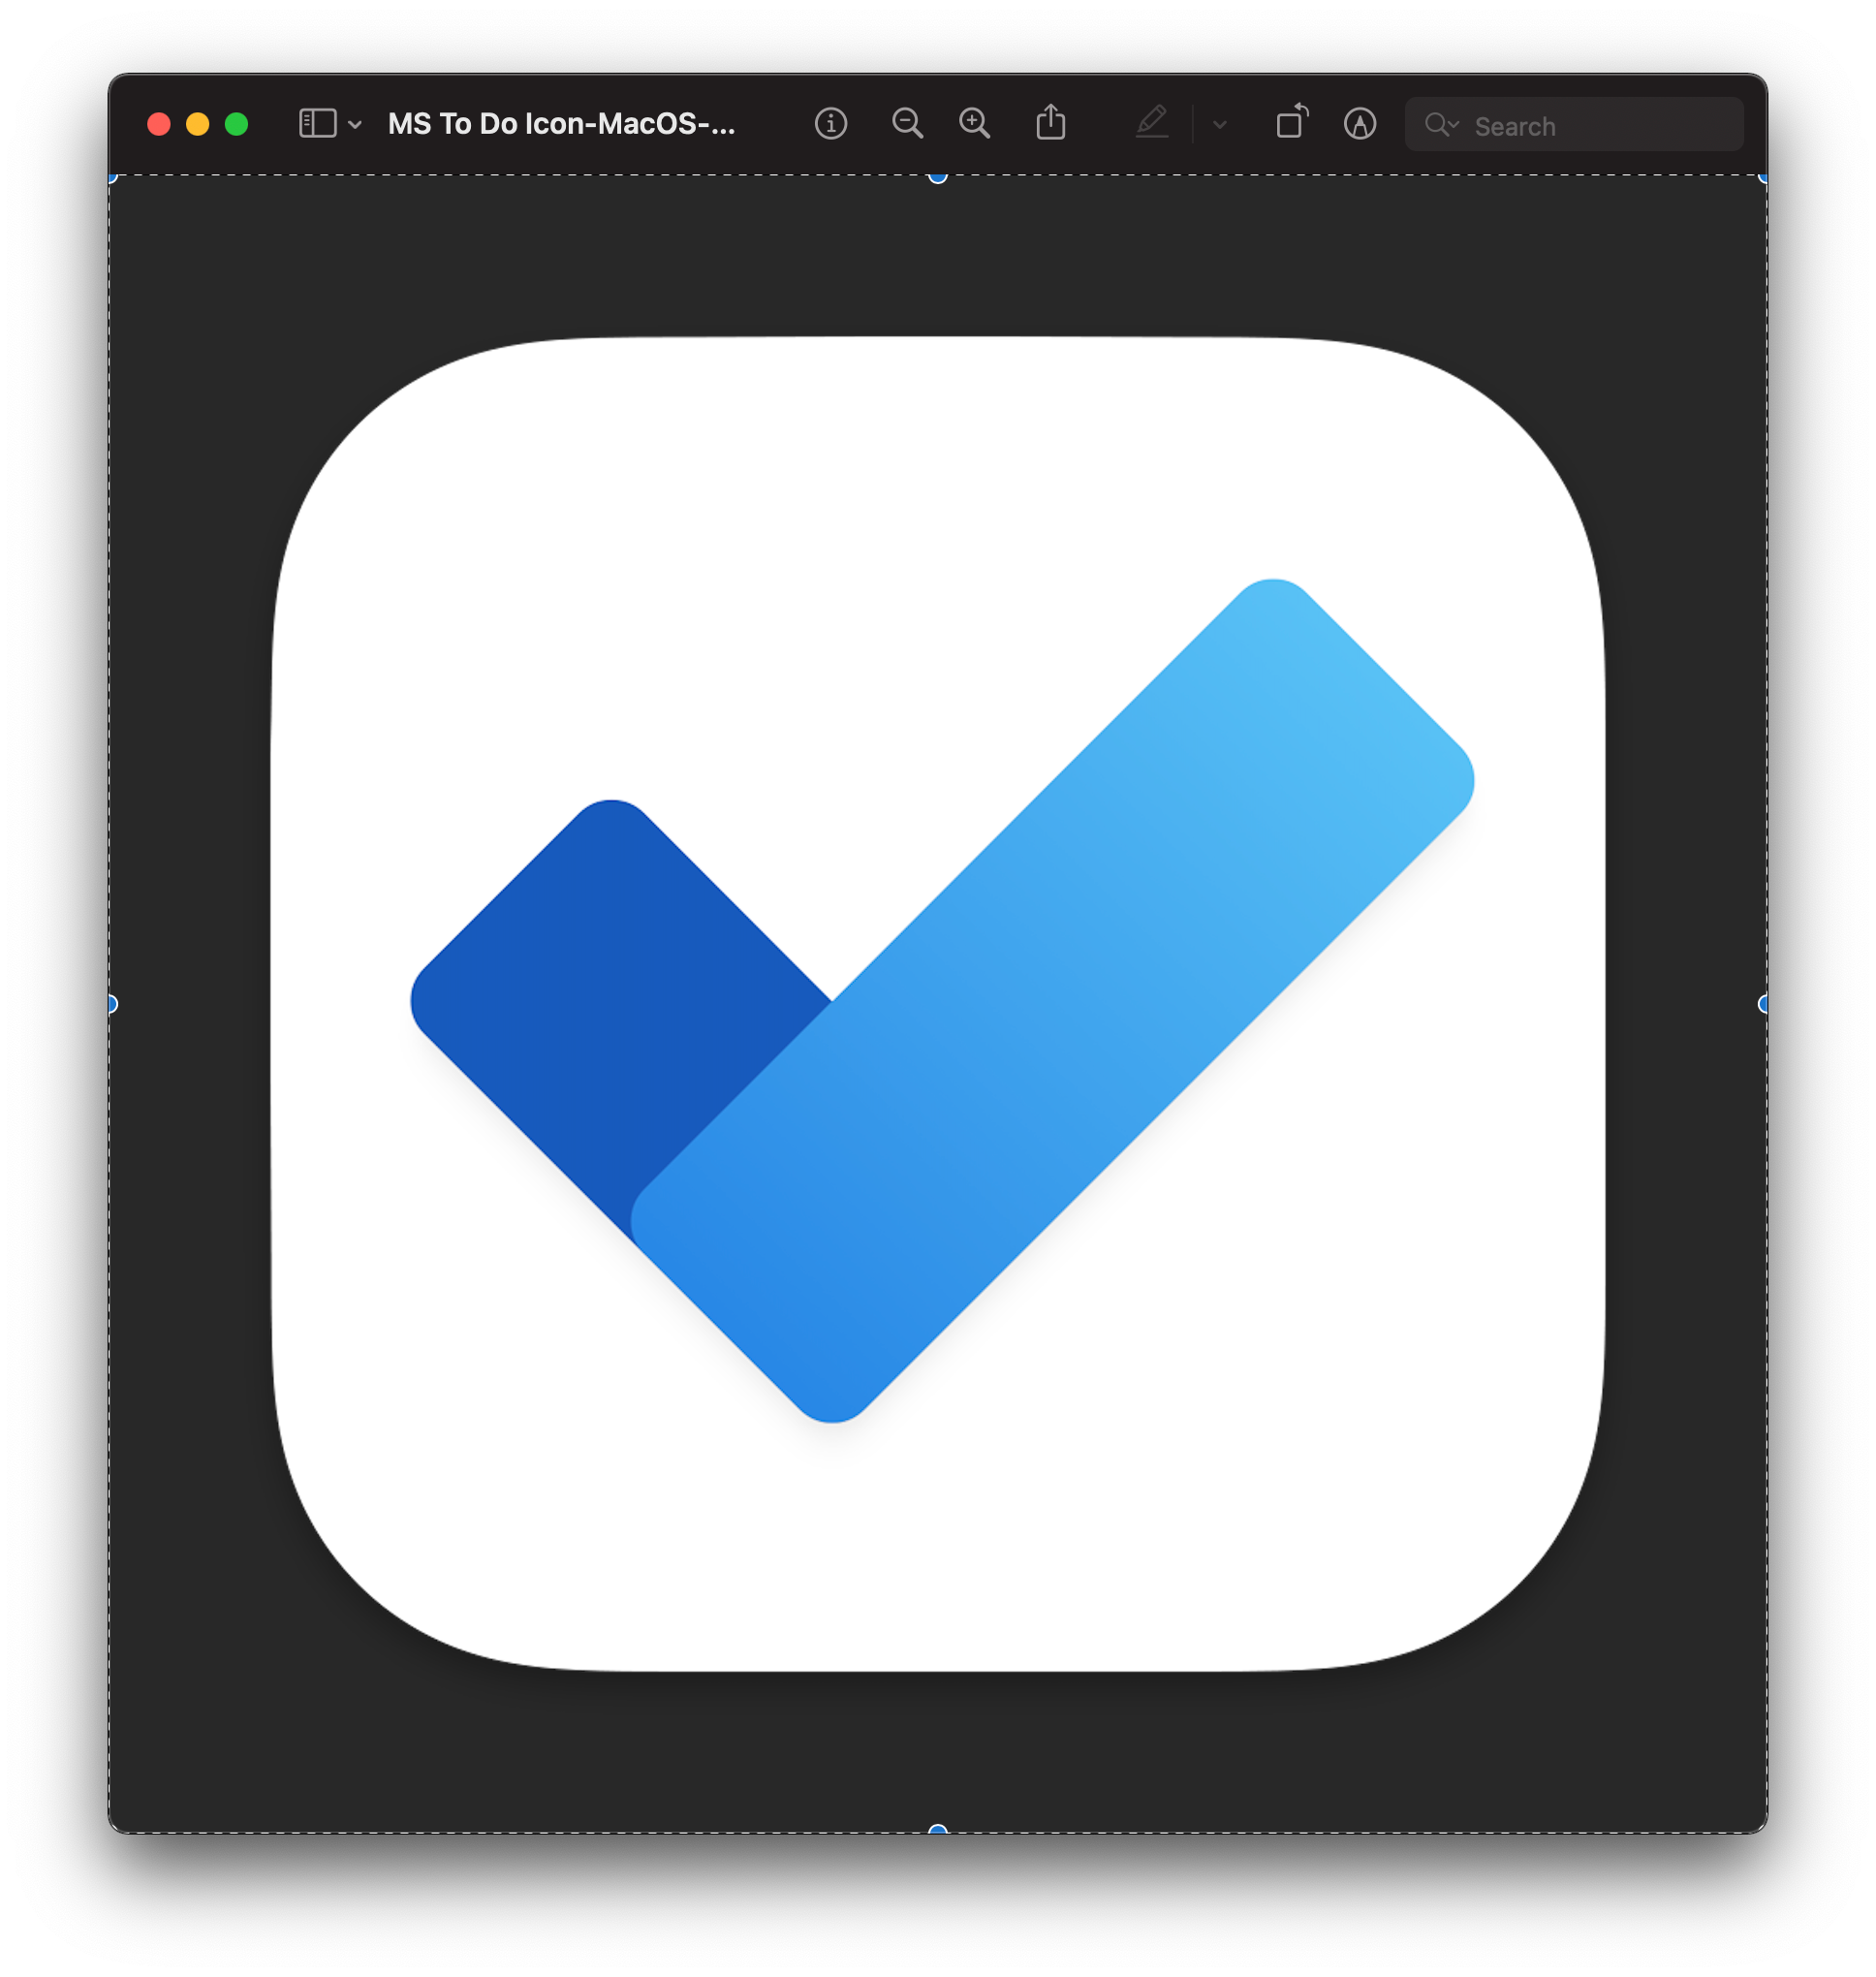 How to replace the Microsoft To Do App Icon on macOS